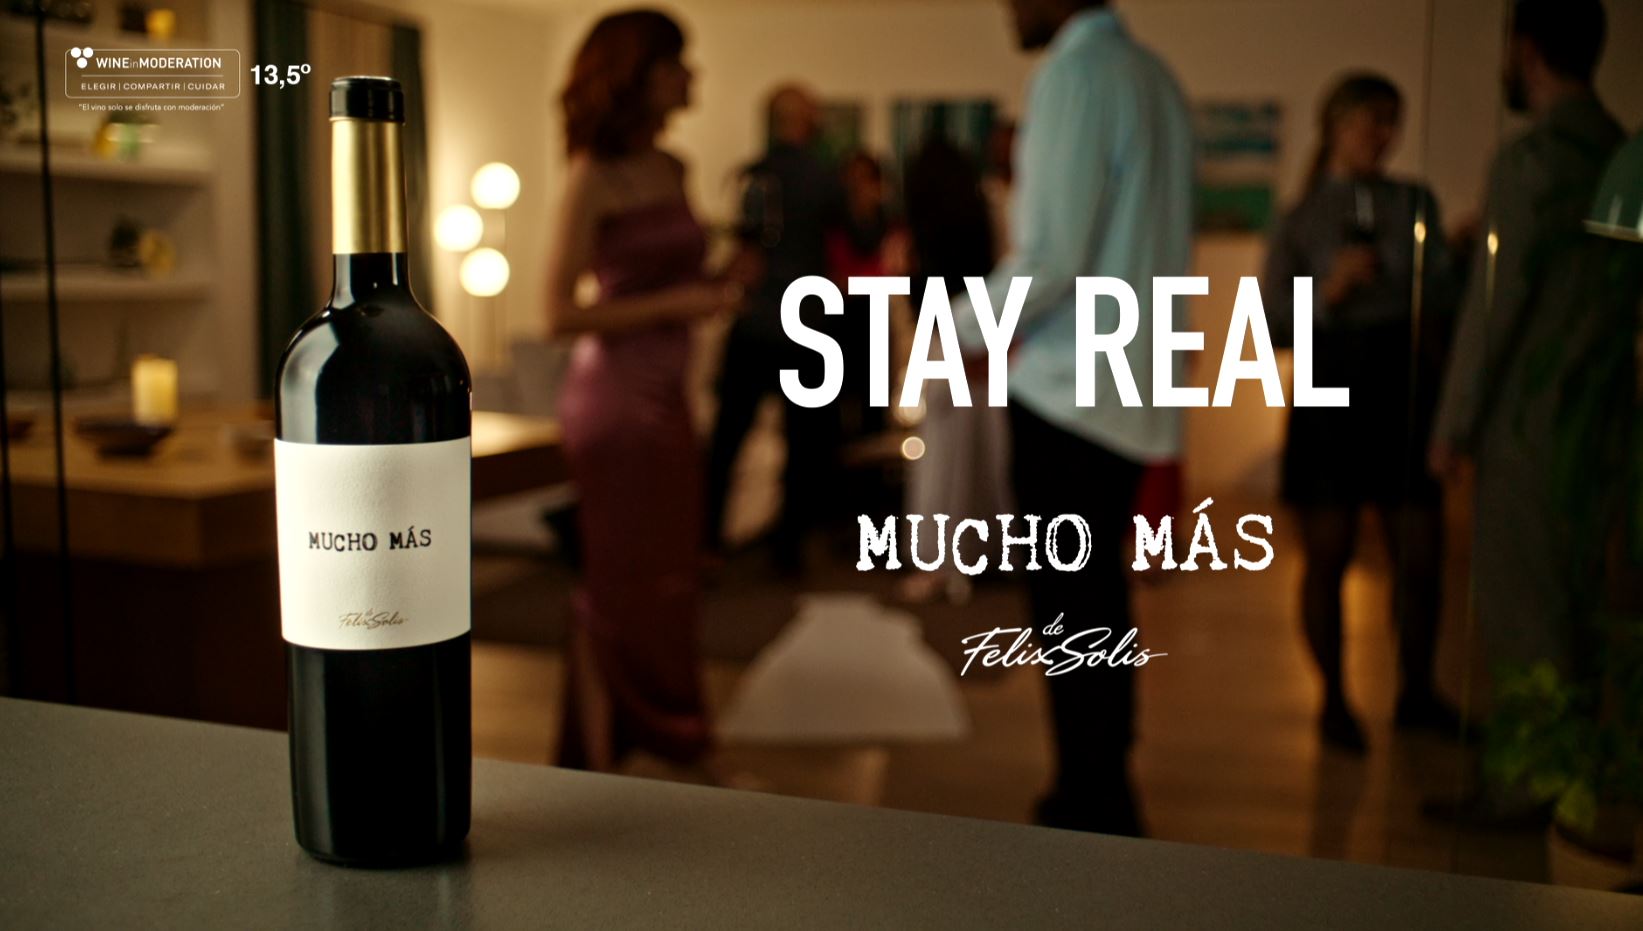 Stay real mucho mas